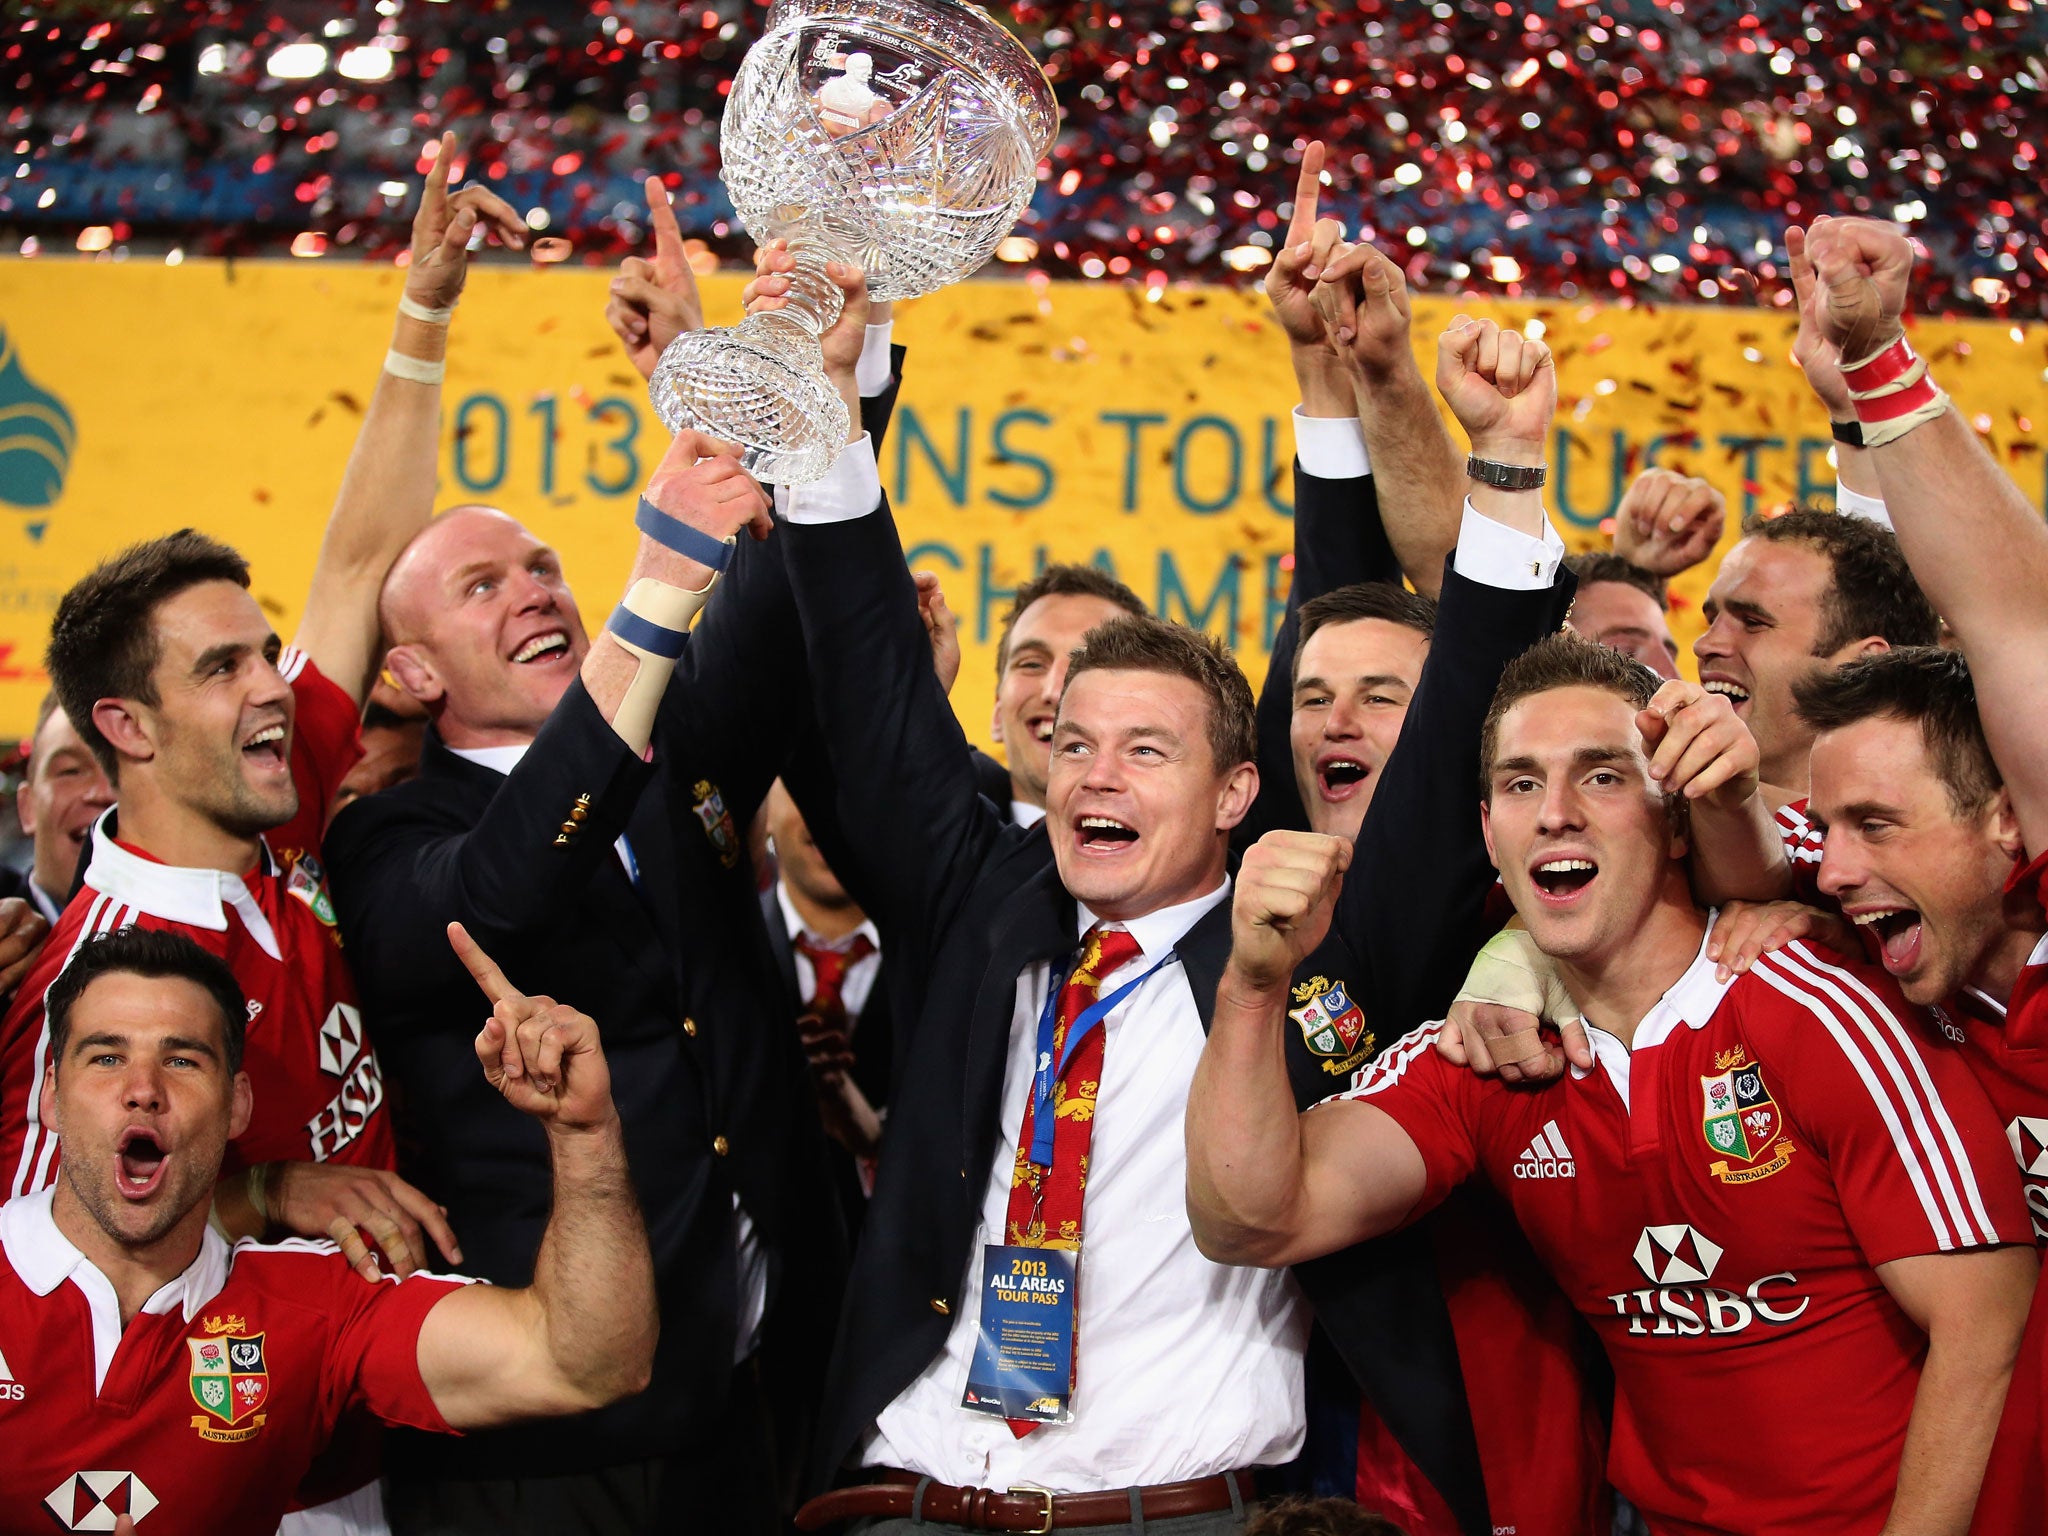 Brian O'Driscoll celebrates the Lions series victory with the rest of the squad